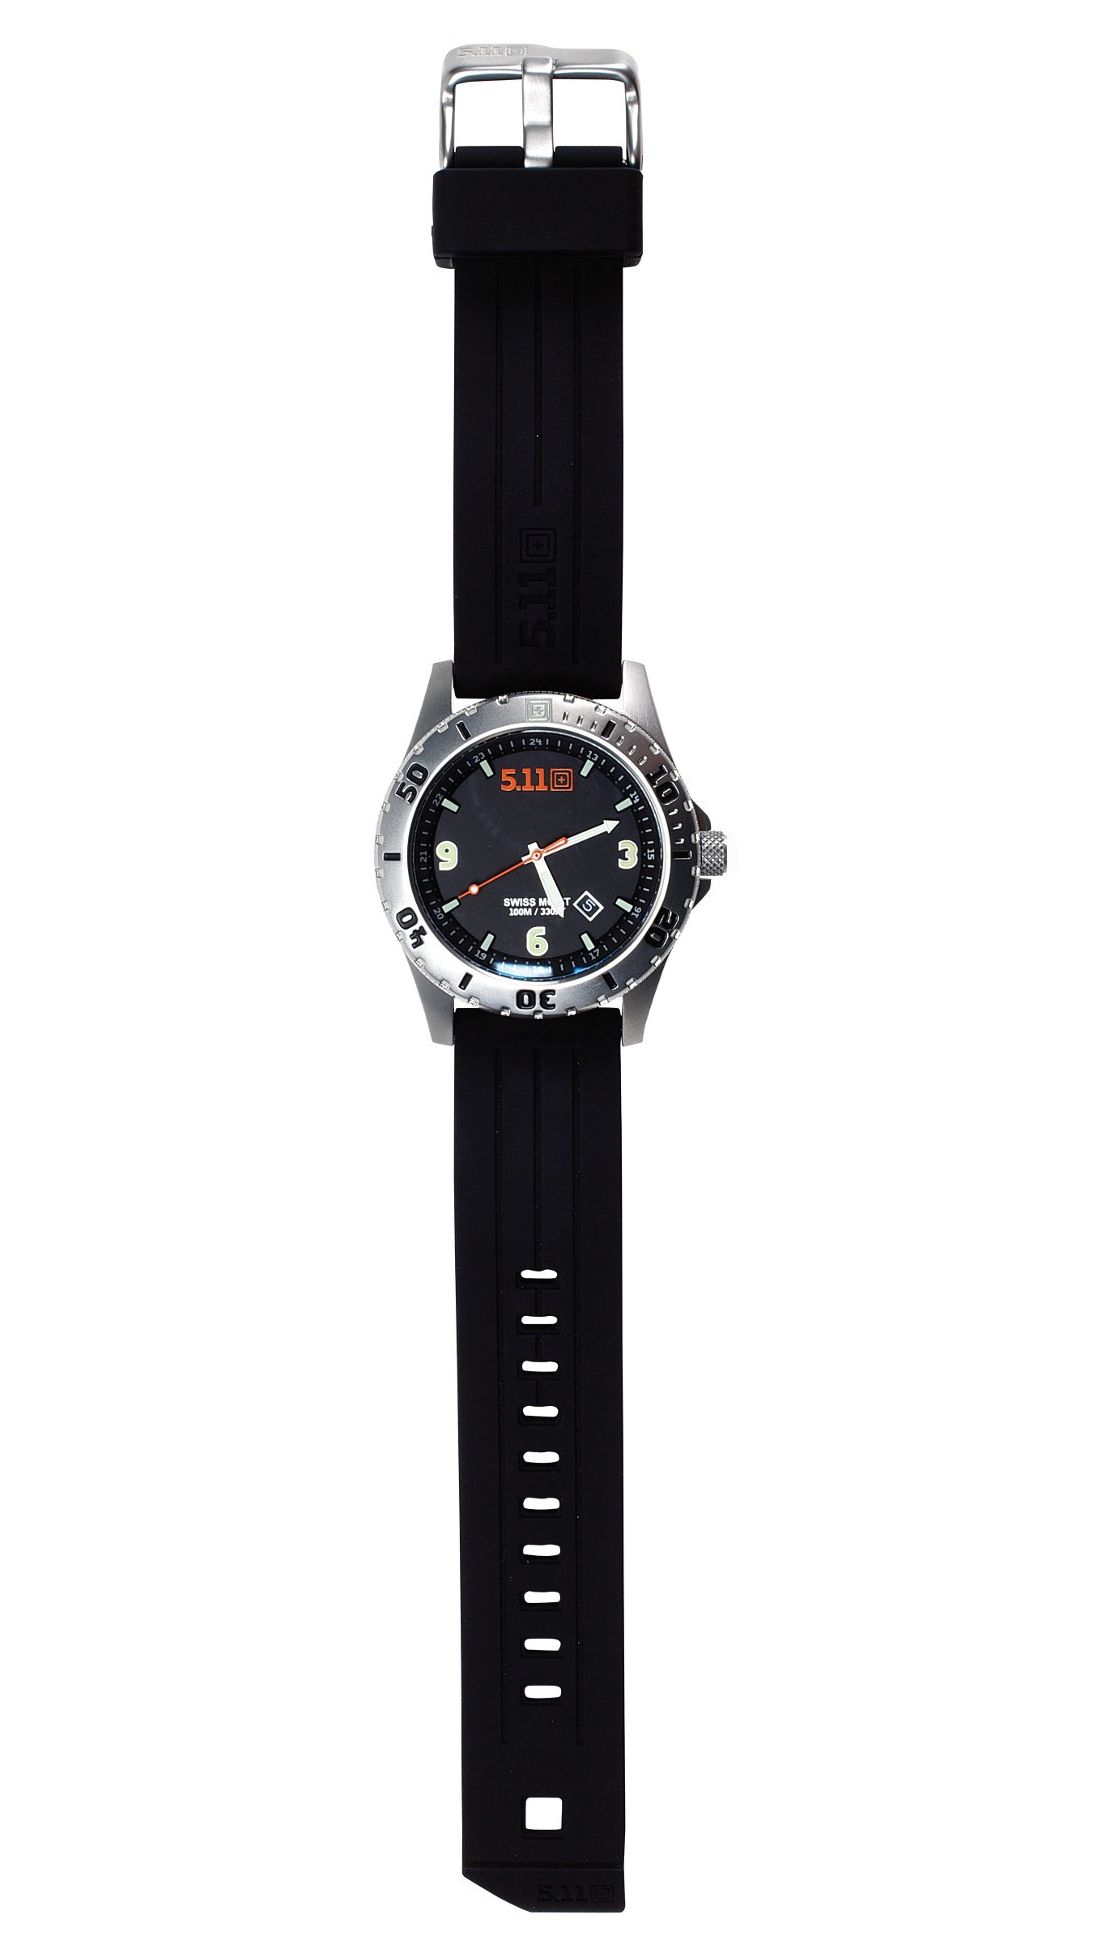 5 11 Tactical Sentinel Watch 5 11 Tactical Watches And Accessories